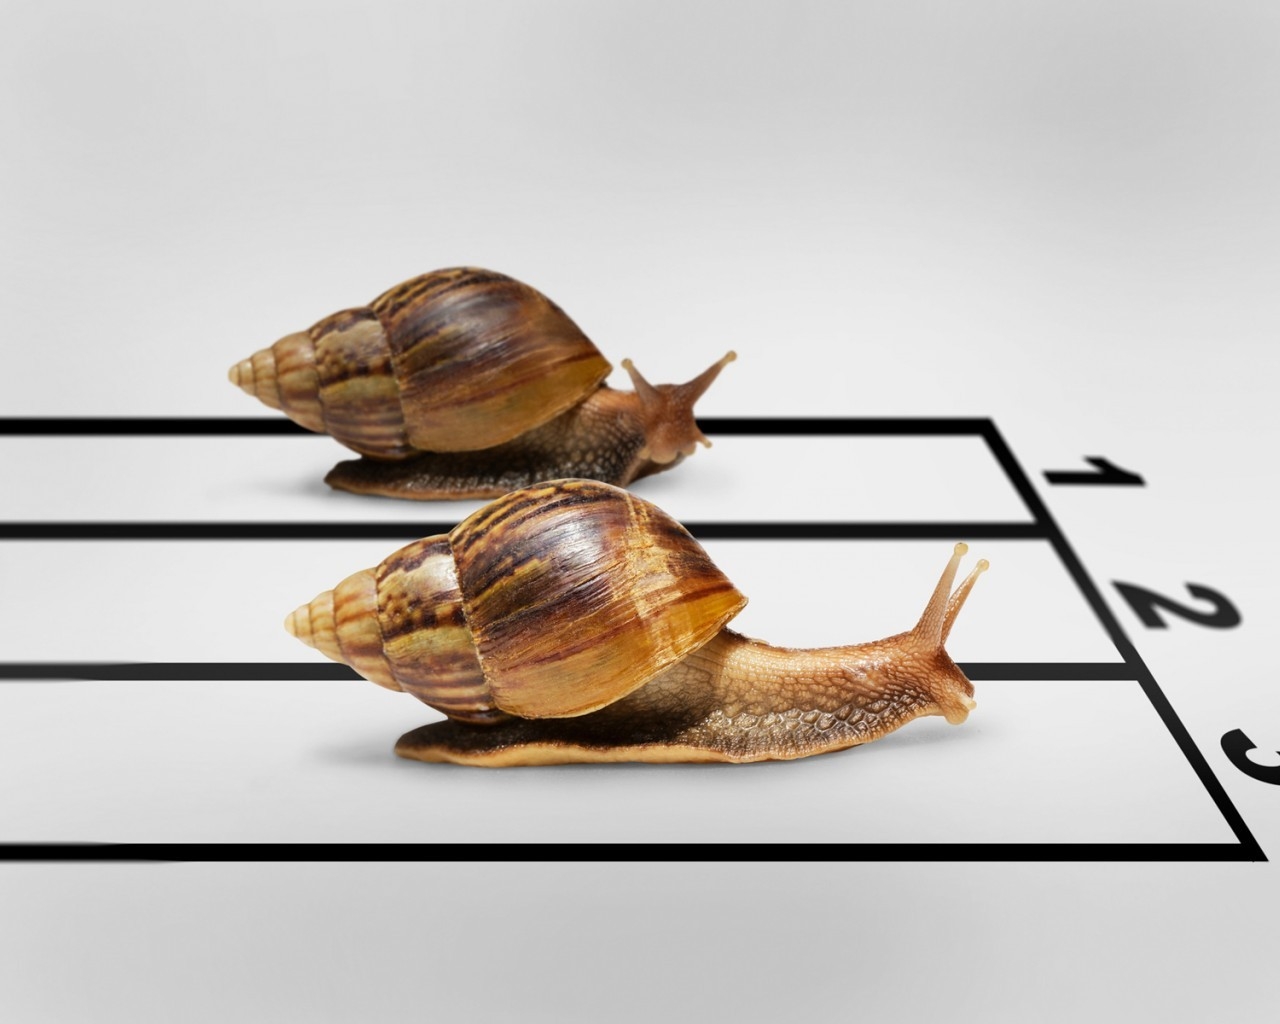 Snail Race for 1280 x 1024 resolution